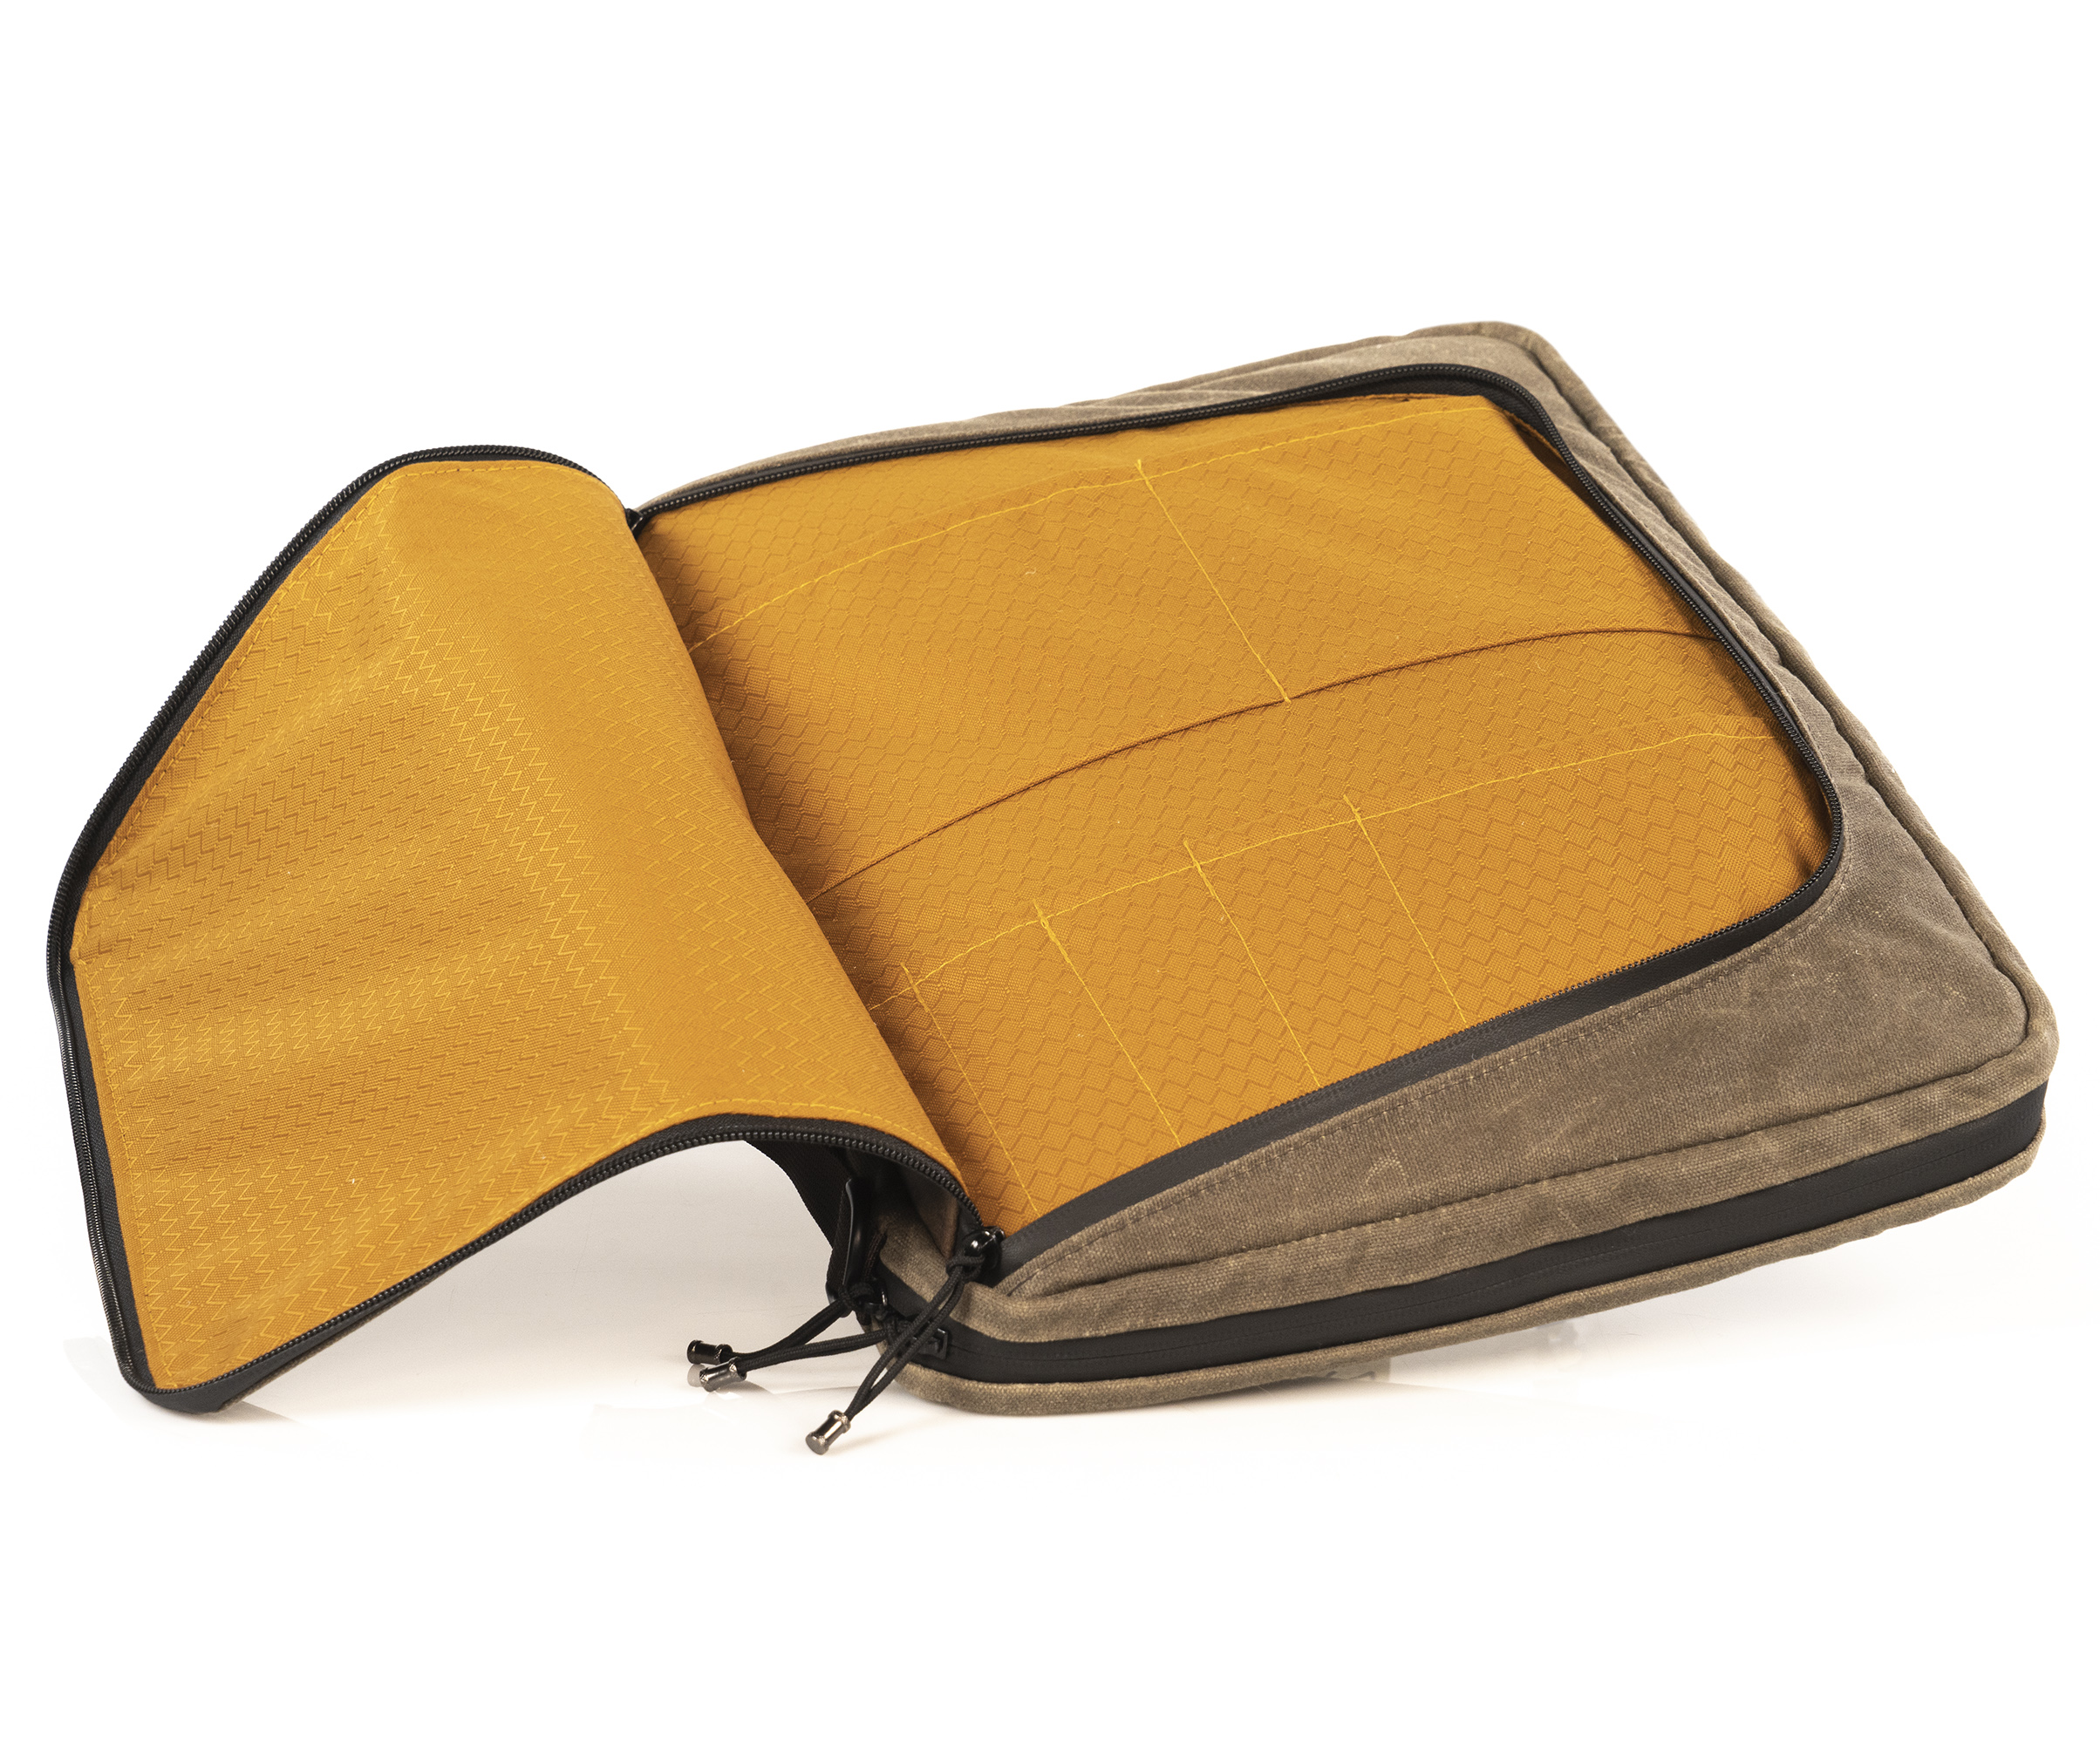 Front flap pocket opens with smooth-gliding zippers on three sides and stows quick-access items